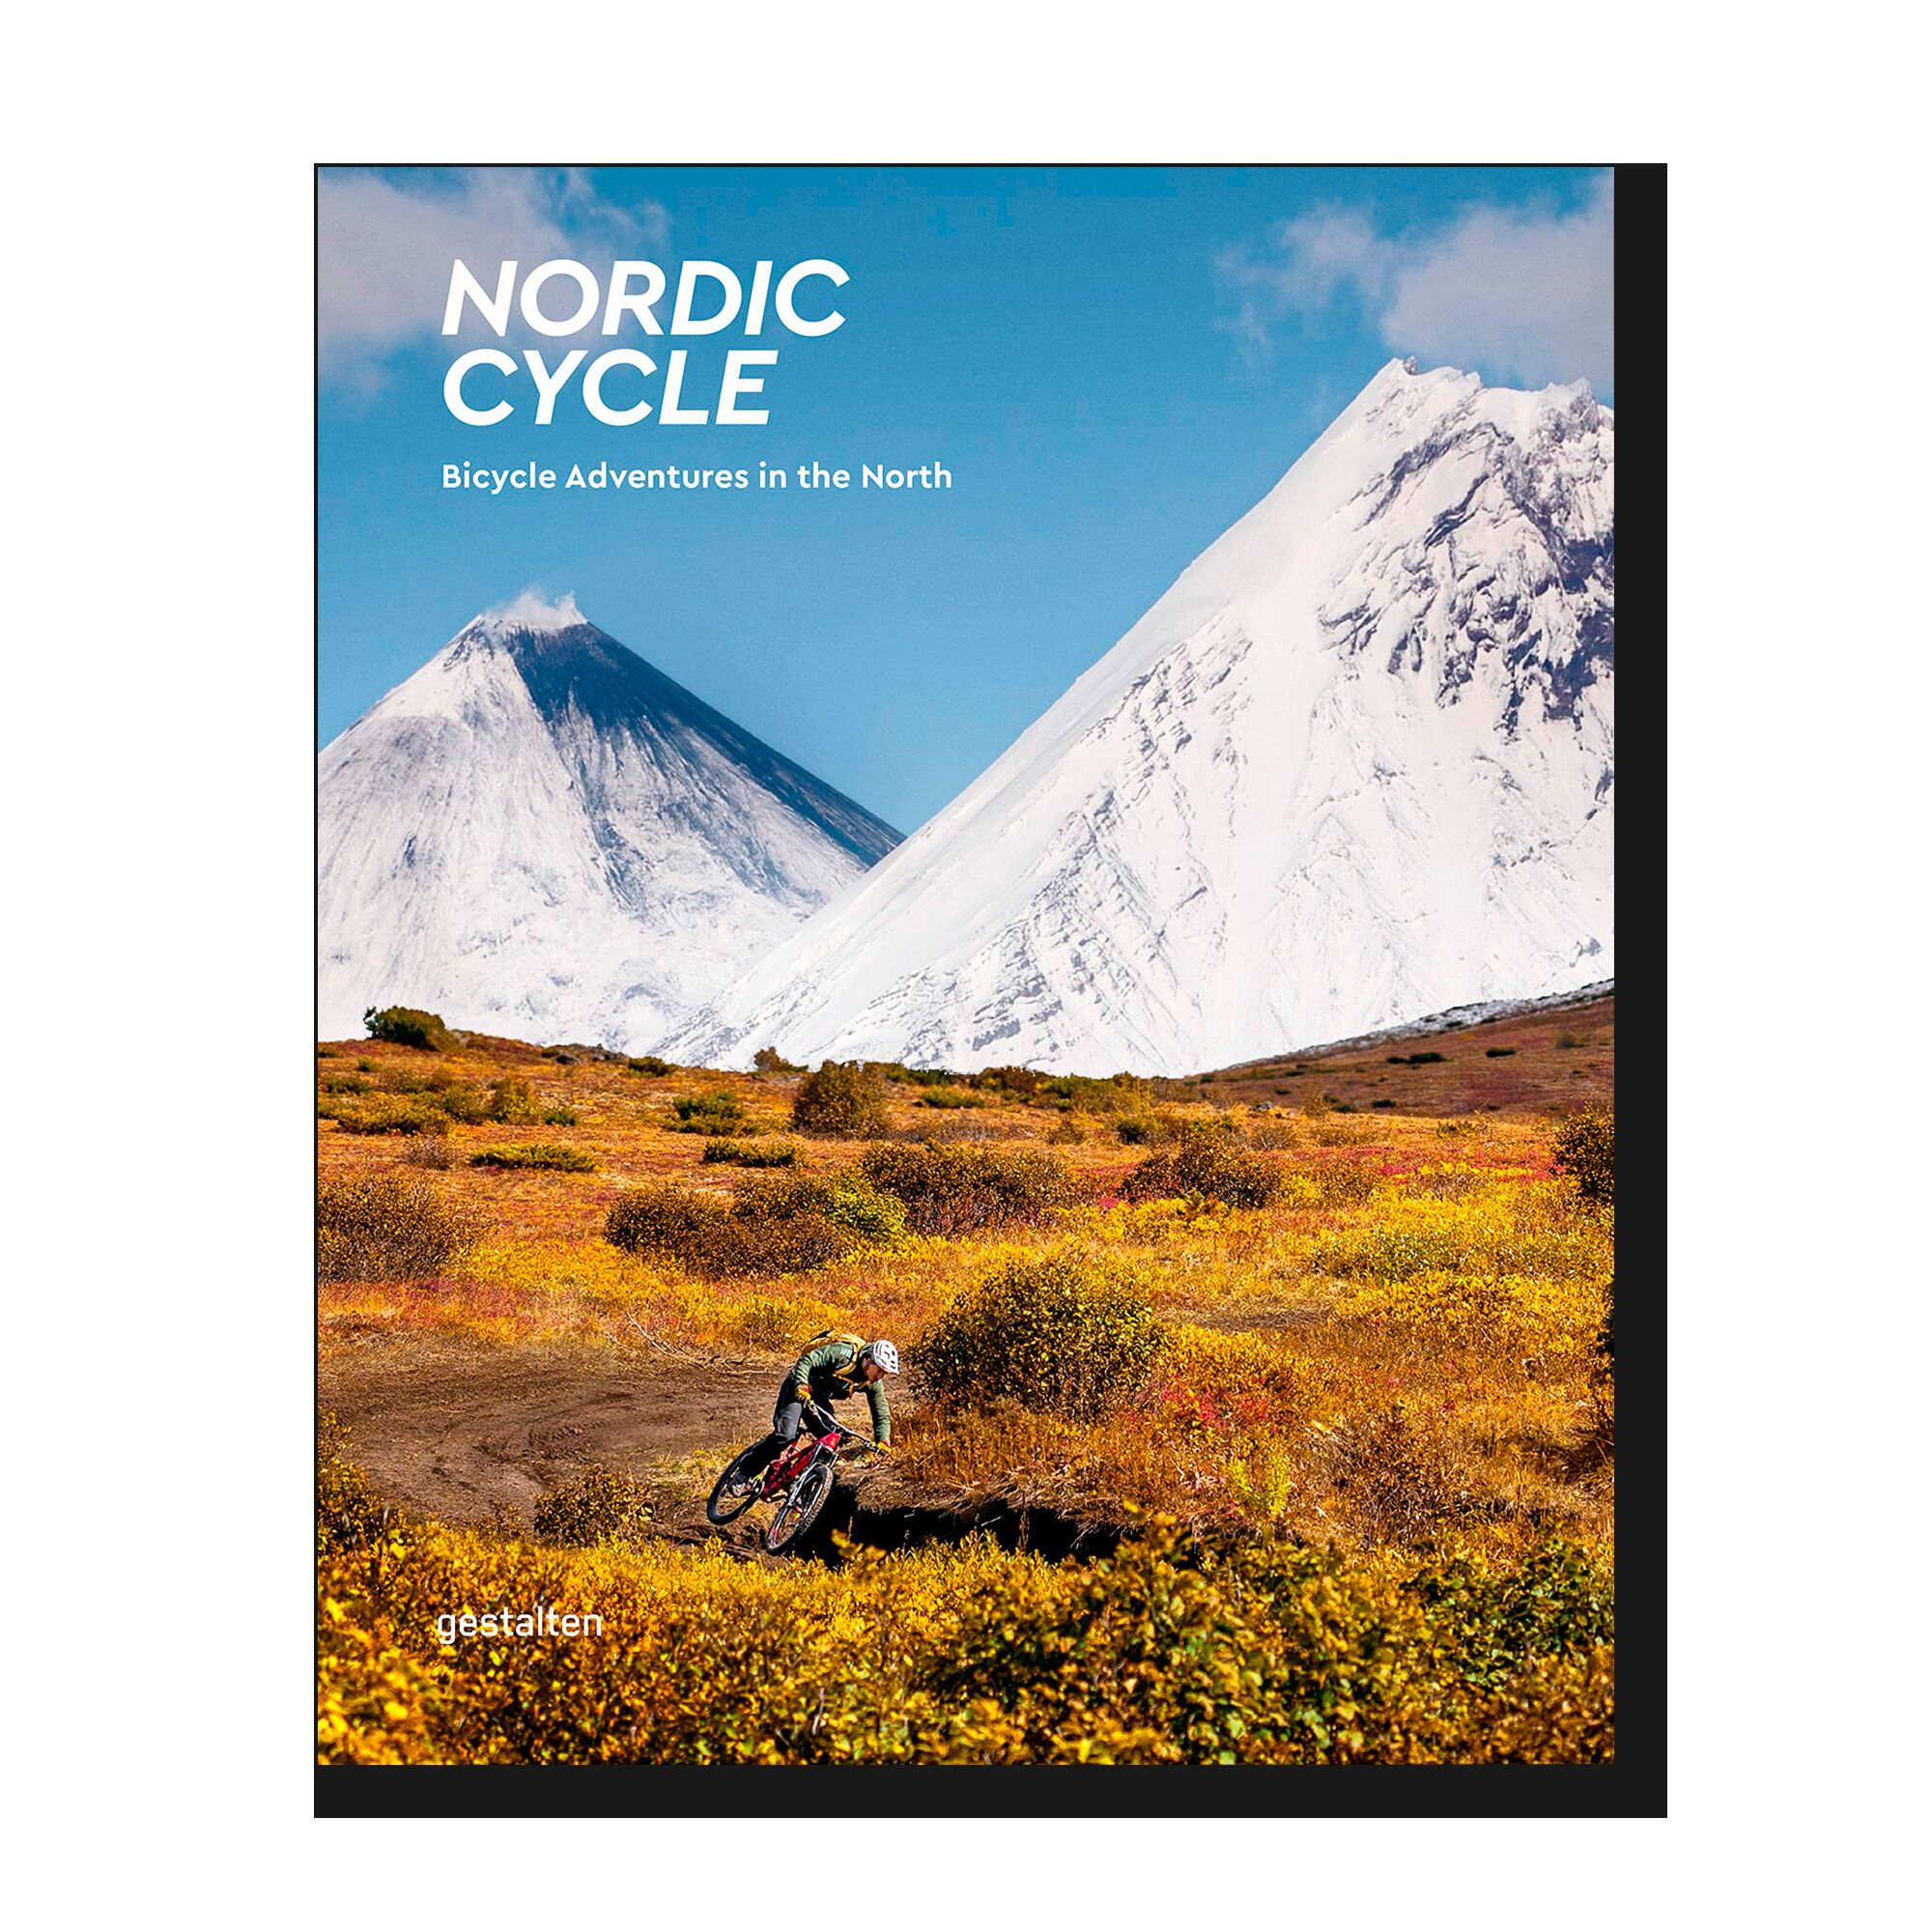 Nordic Cycle: Bicycle Adventures in the North